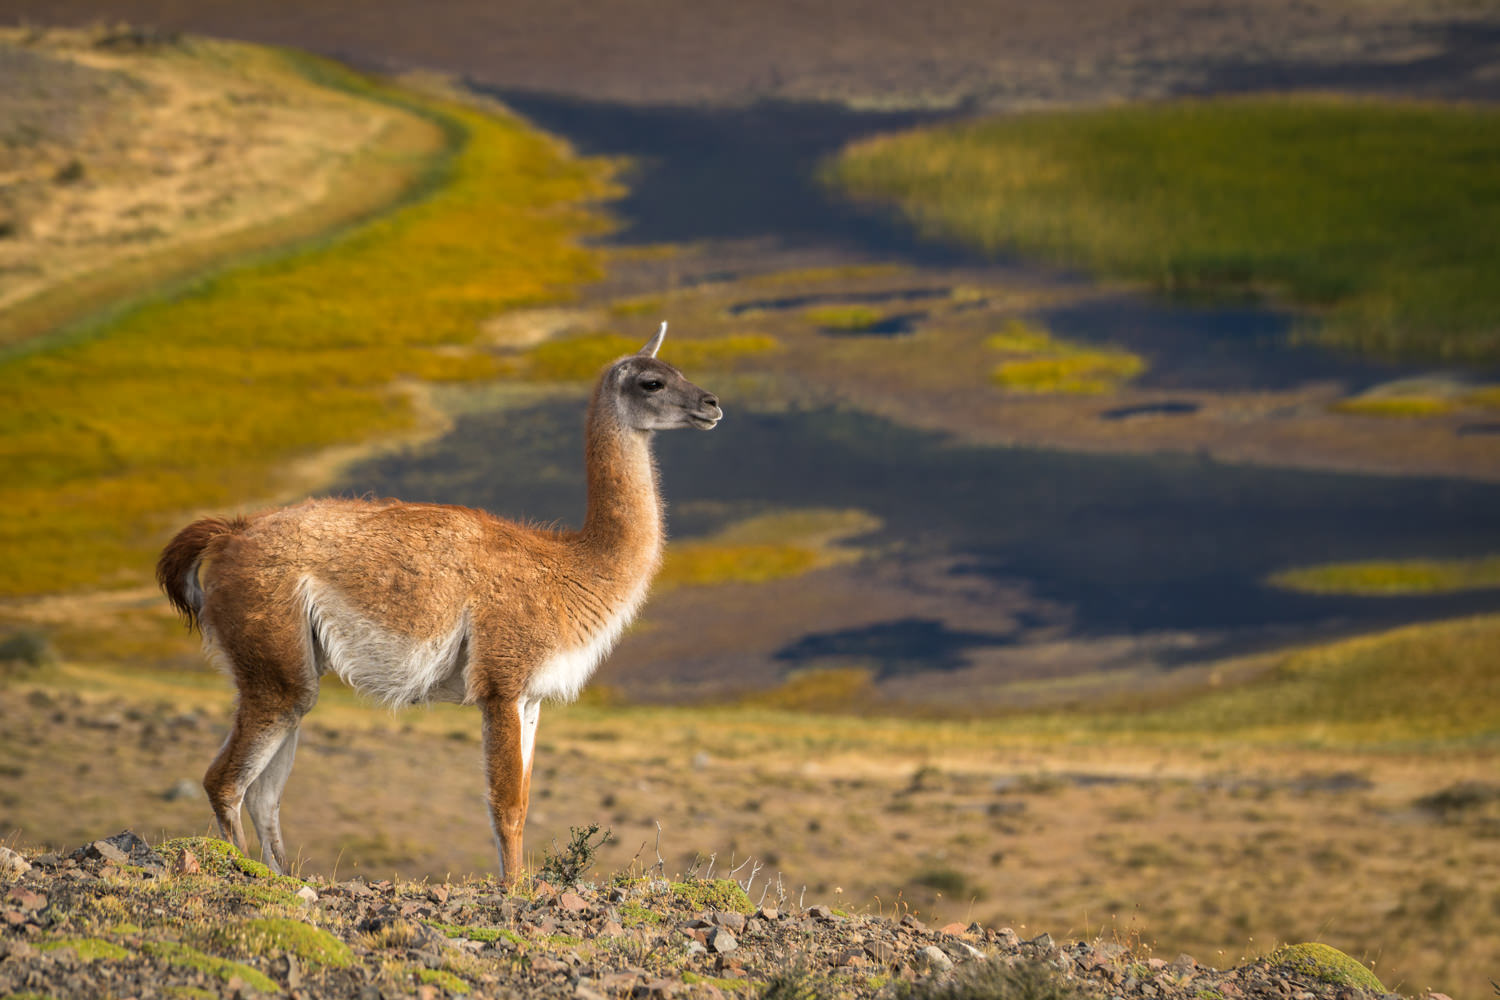 Sony a6300 w/ Sony 70-200 f/4 FE photographing a Guanaco in Torres del Paine National Park